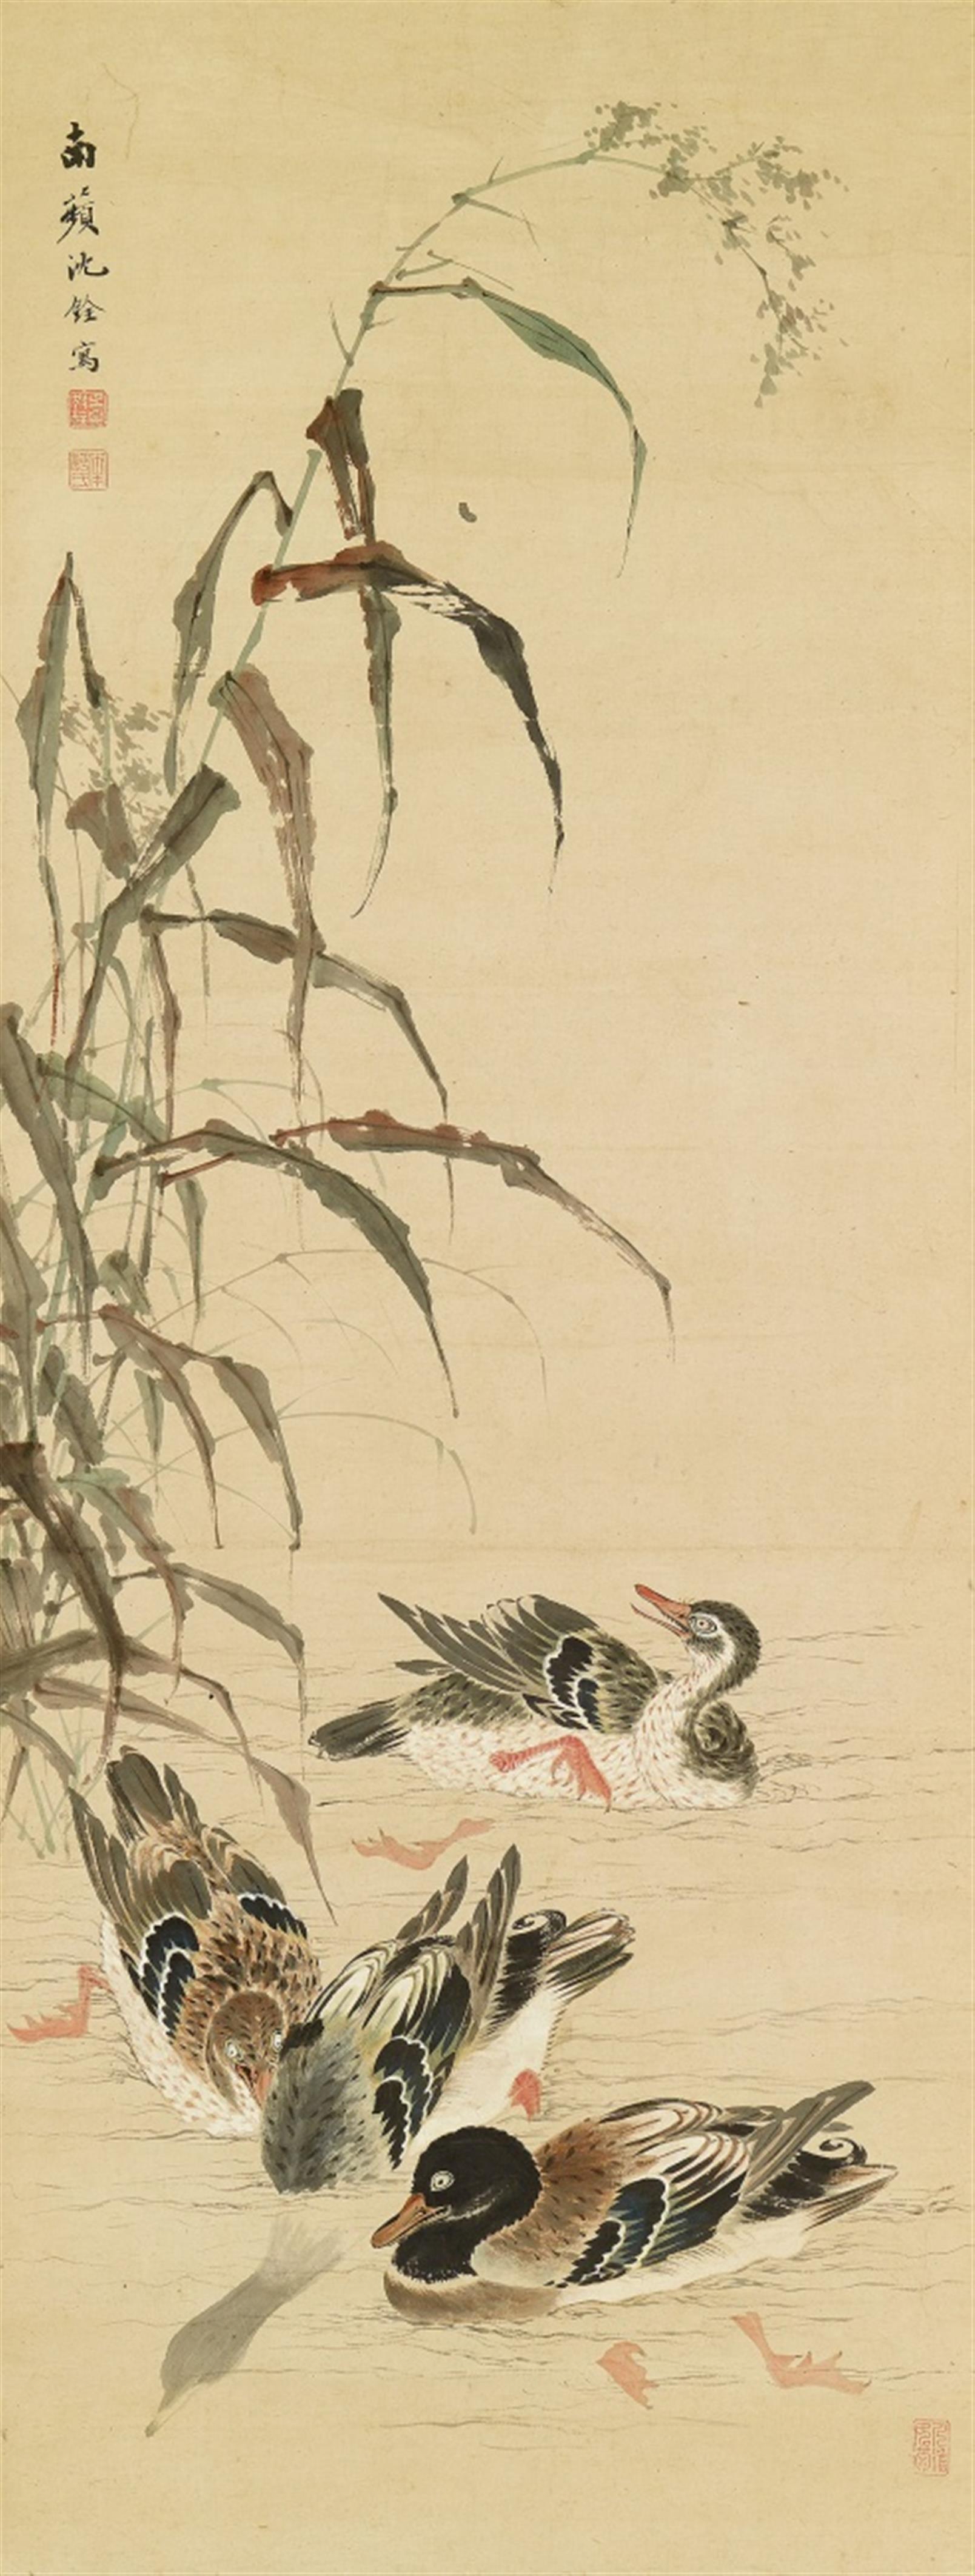 Shen Quan, in the manner of - In the manner of Shen Quan depicting mandarin ducks swimming underneath blossoming reeds. Ink and light colours on paper. Inscribed Nanpin Shen Quan and sealed Wuxing Shen Quan ... - image-1